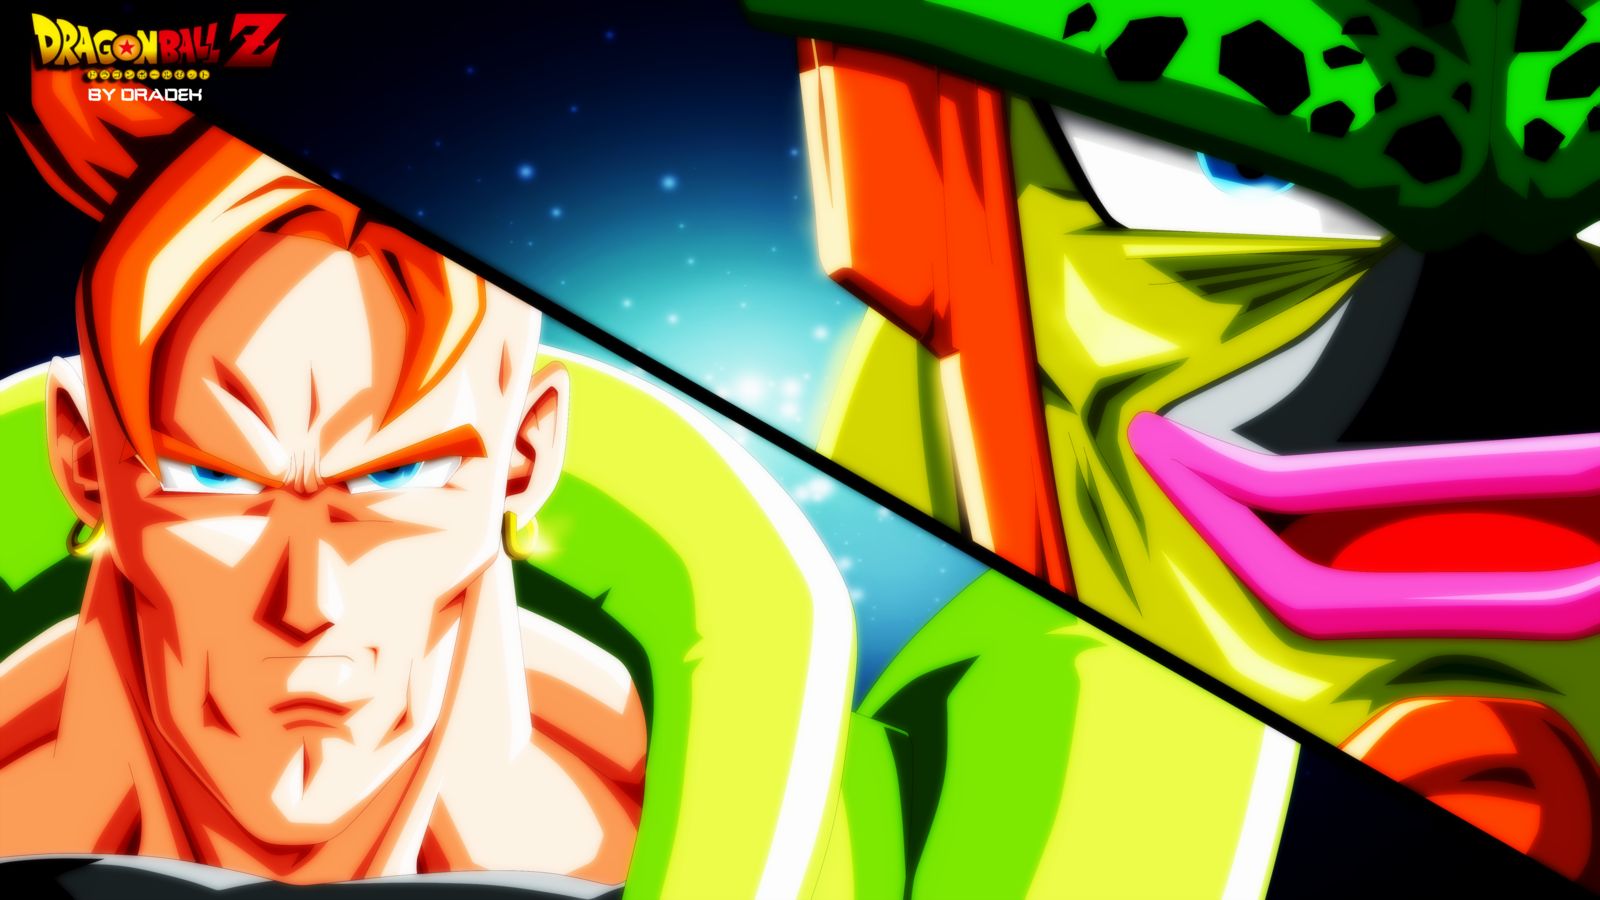 Android 16 (Dragon Ball) HD Wallpapers and Backgrounds